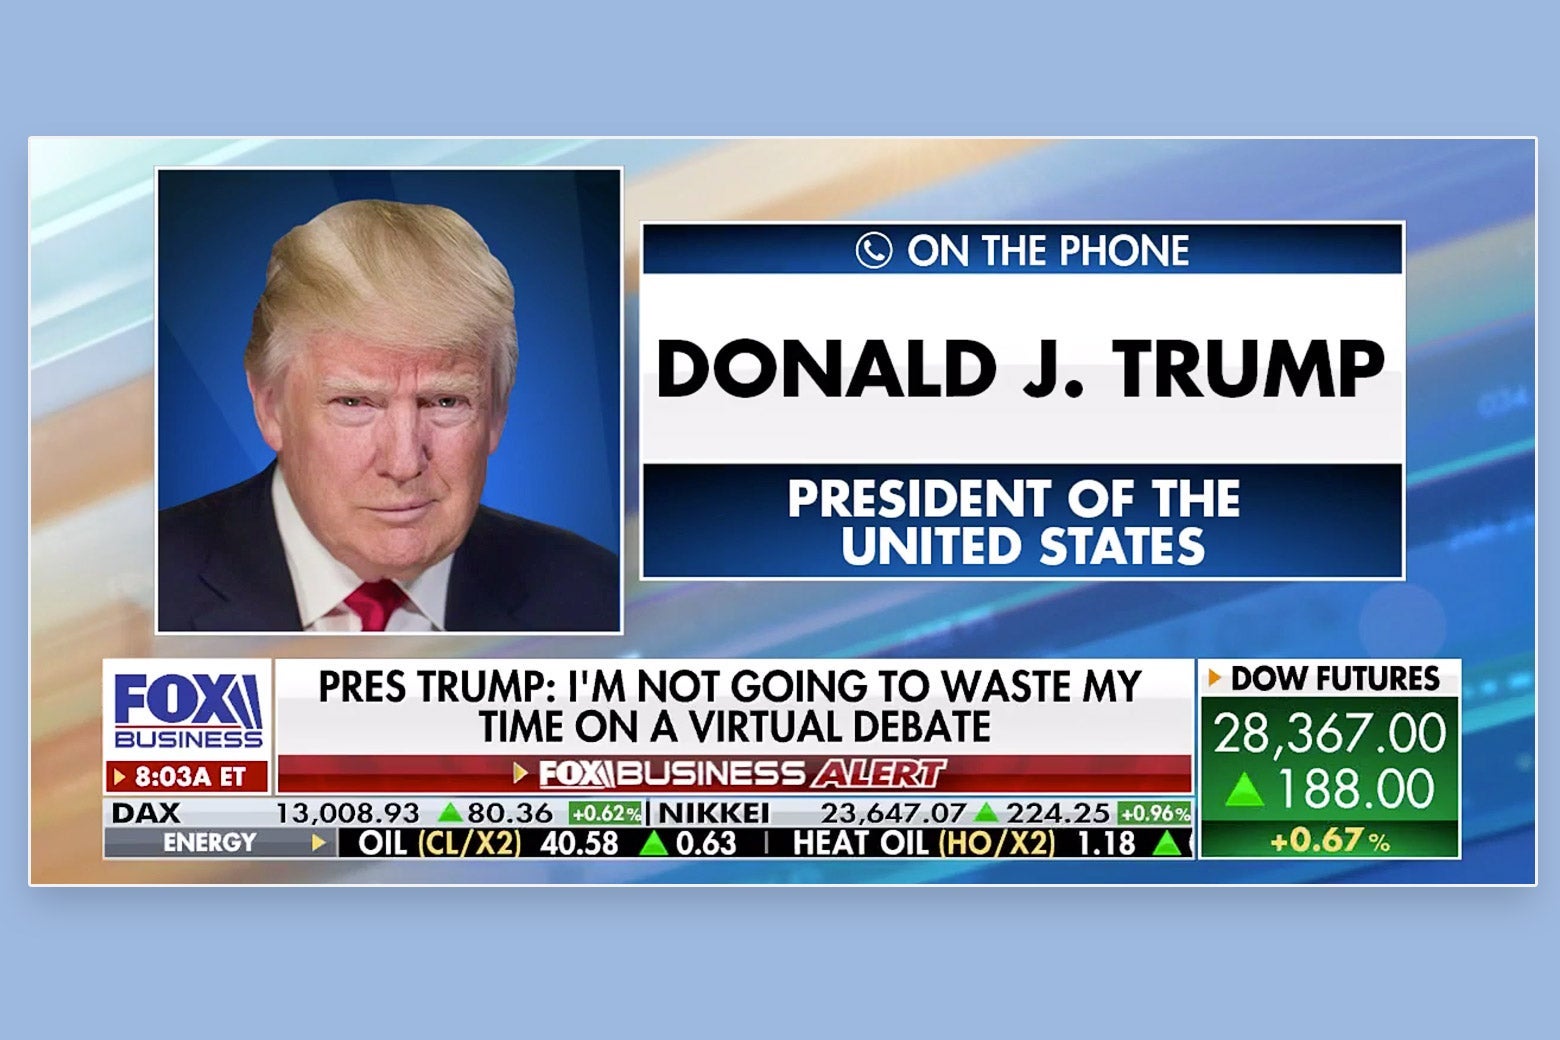 Fox News graphic for Donald Trump calling into the morning business show.